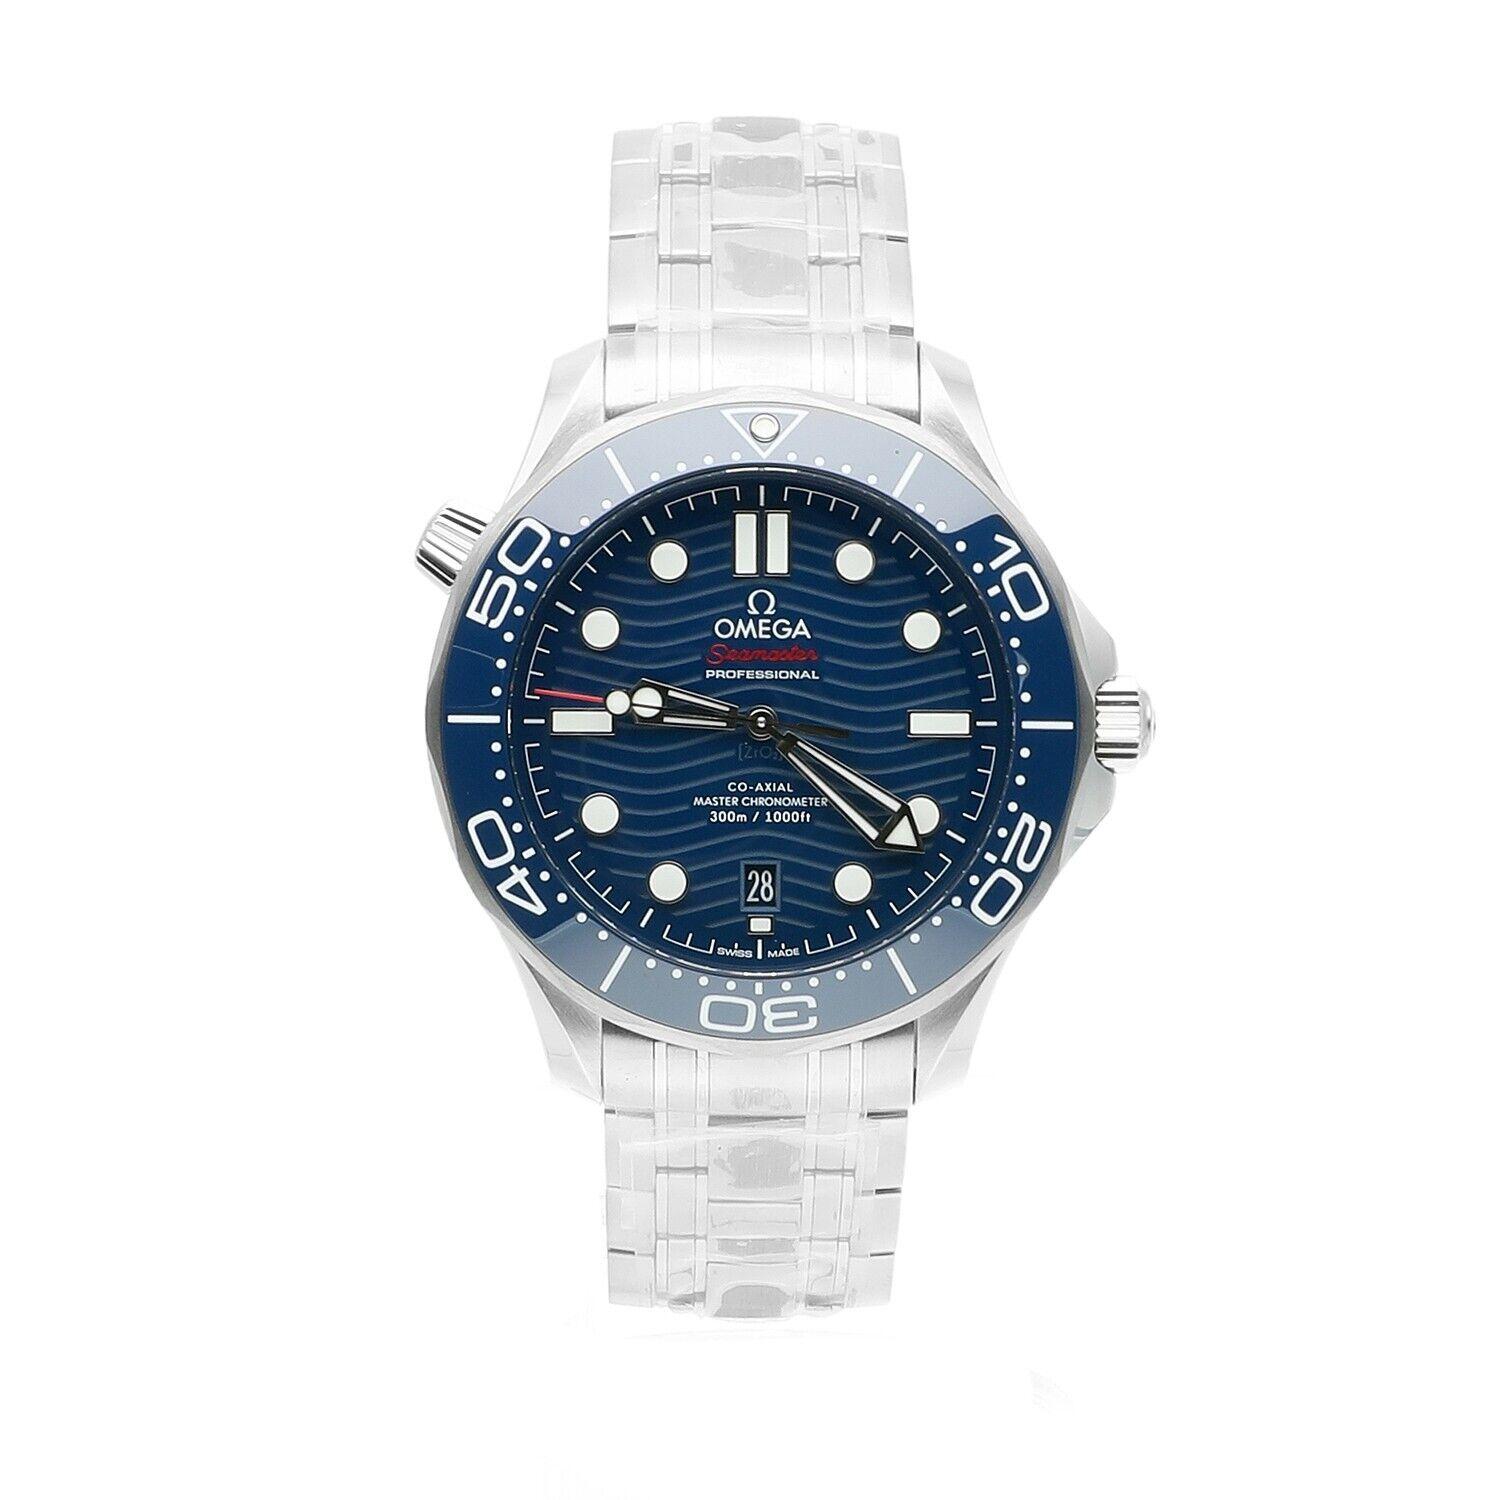 This 42 mm model is crafted from stainless steel and includes a blue ceramic bezel with a white enamel diving scale. The dial is also polished blue ceramic and features laser-engraved waves and a date window at 6 o’clock.

The skeleton hands and